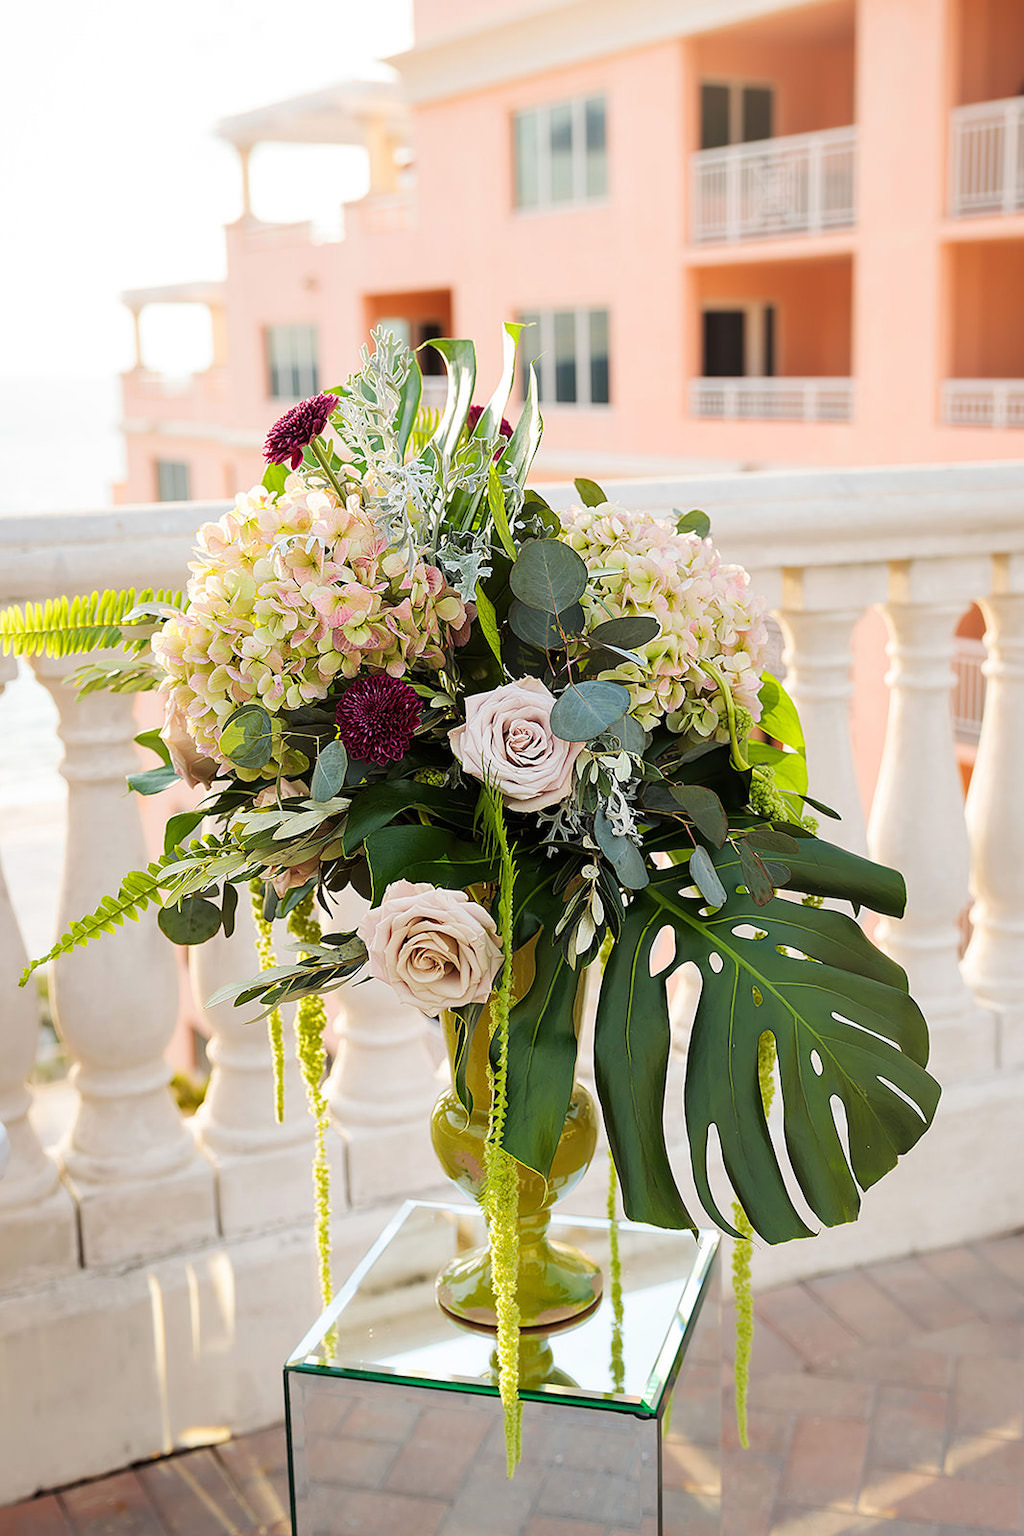 Romantic Outdoor Rooftop Terrace Wedding Ceremony Decor, Mirror Pedestals with Tall Gold Vases and Blush Pink Roses, Hydrangeas, Amaranthus, Monstera Leaves and Greenery | Venue Hyatt Regency Clearwater Beach